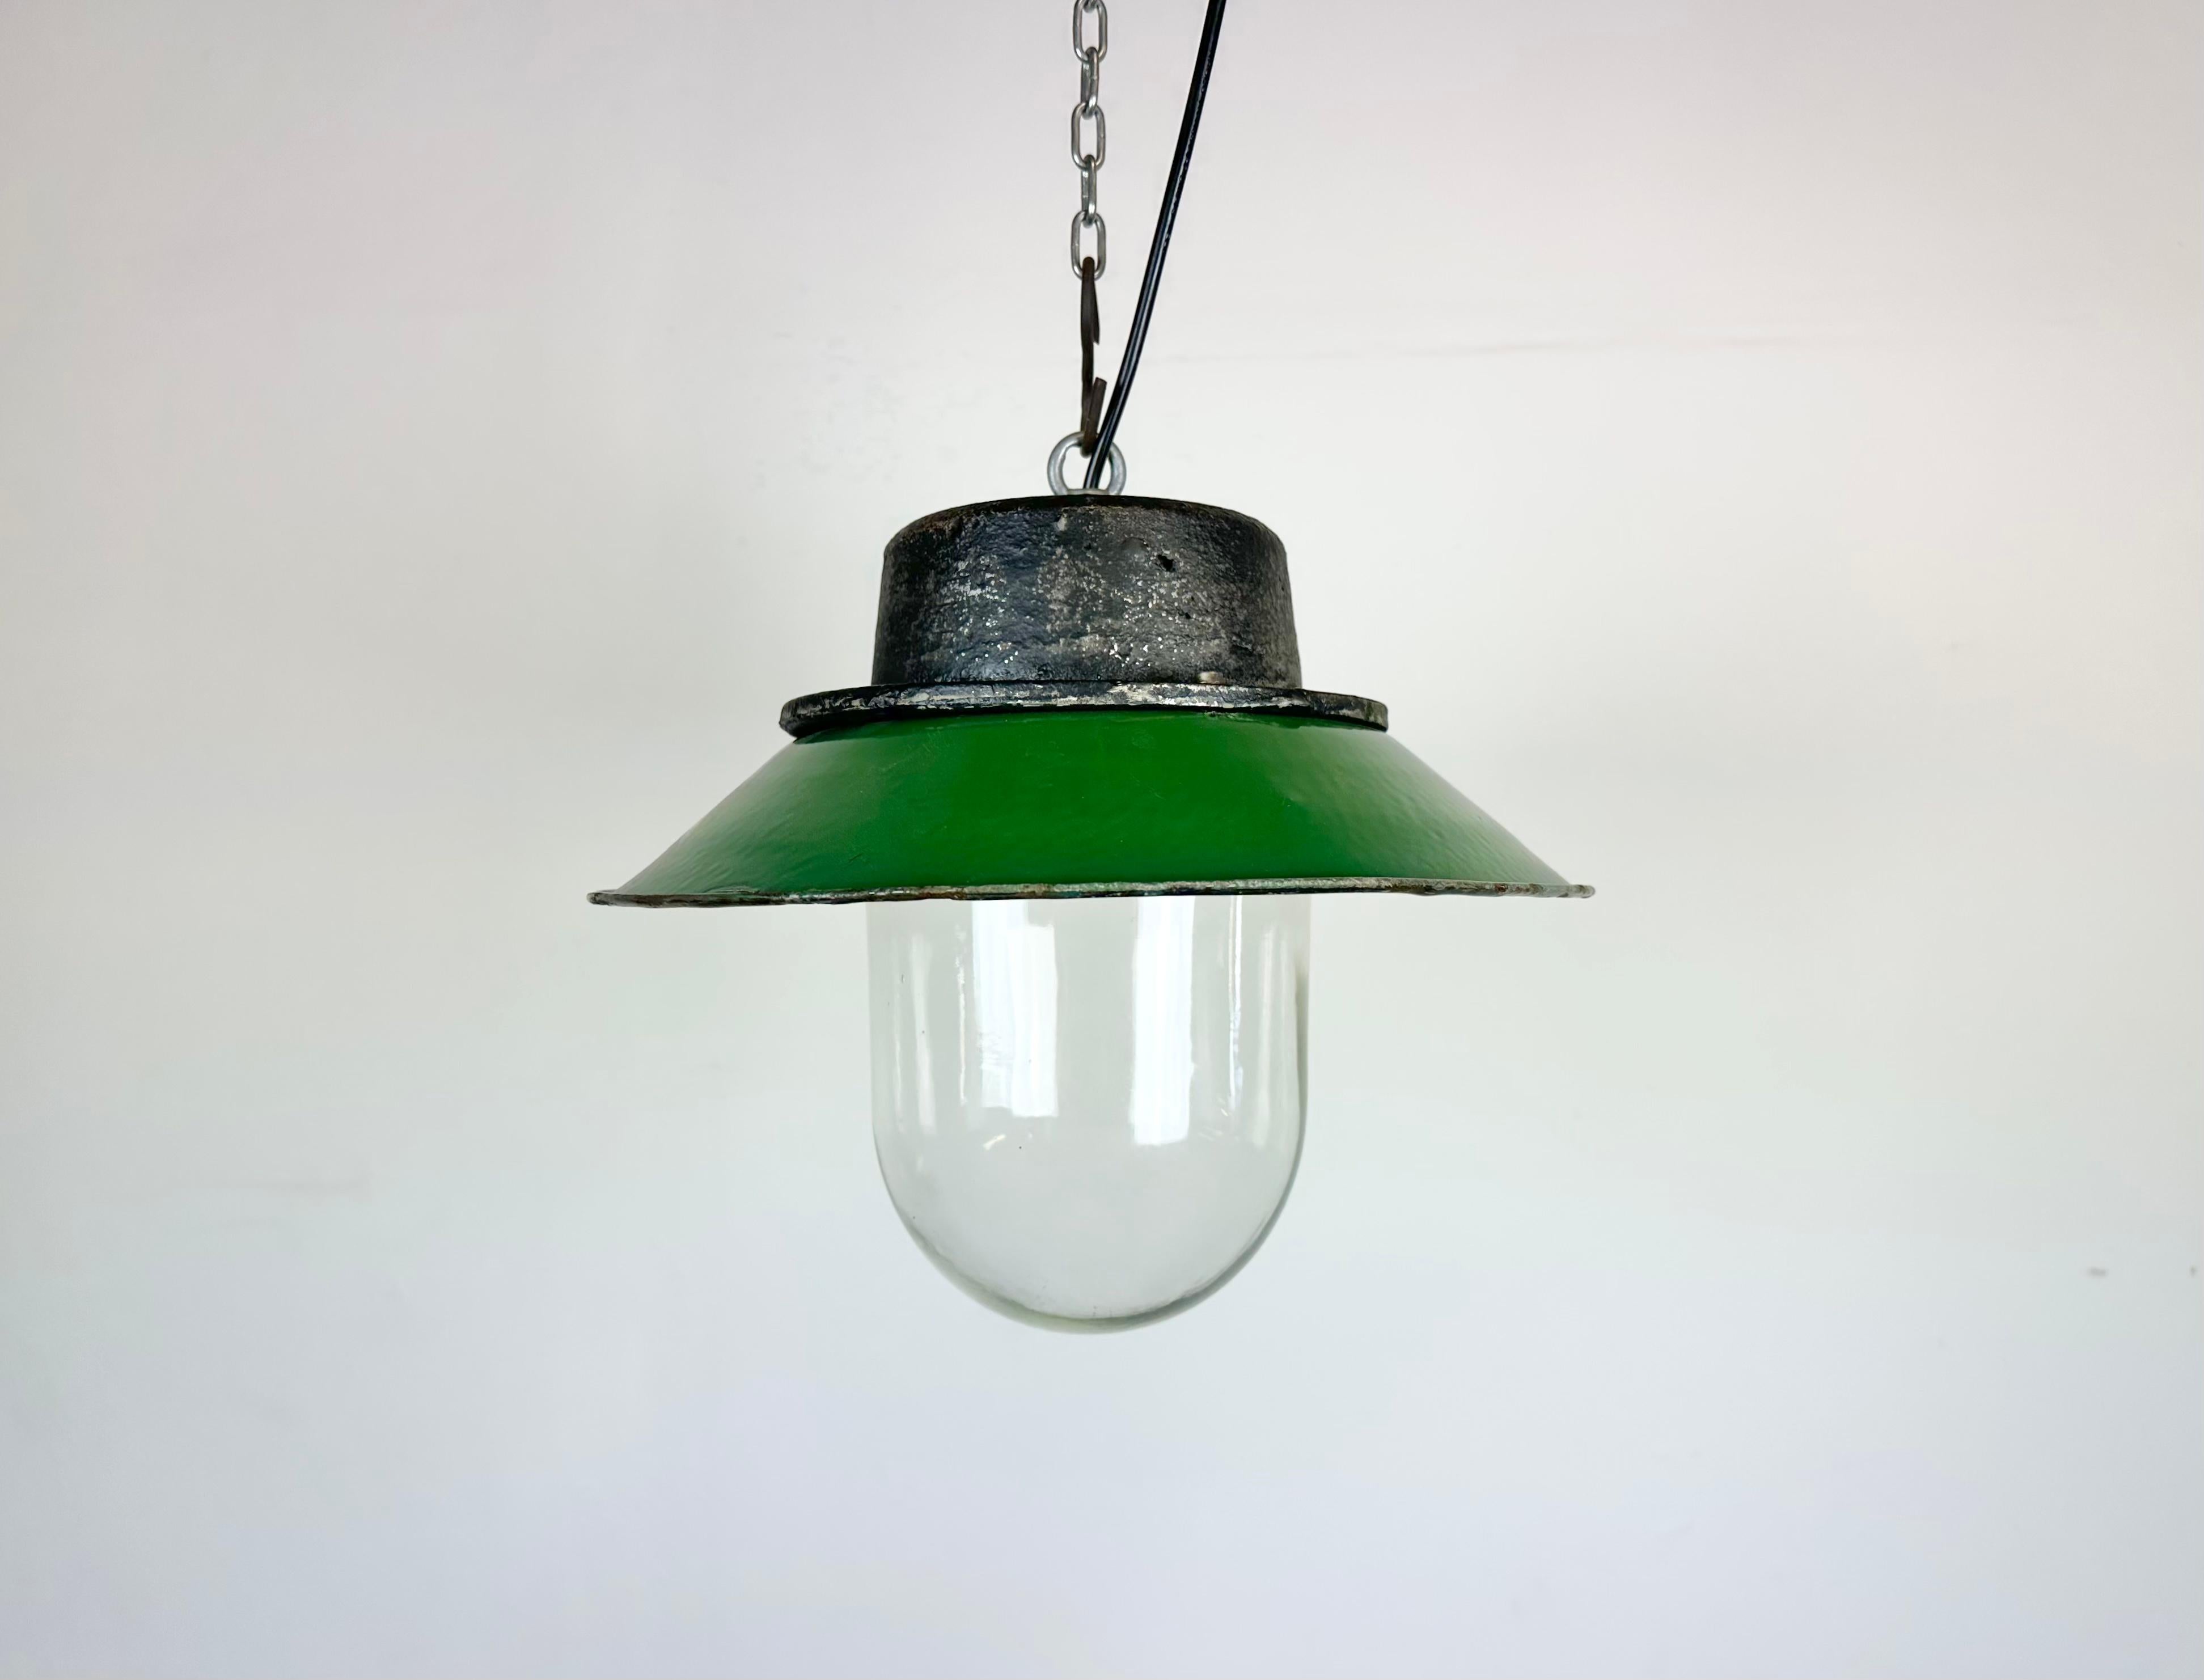 Industrial hanging lamp manufactured in Poland during the 1960s. It features a green enamel shade with white enamel interior, a cast iron top and a glass cover. The porcelain socket requires E 27/ E26 lightbulbs .New wire. The weight of the lamp is